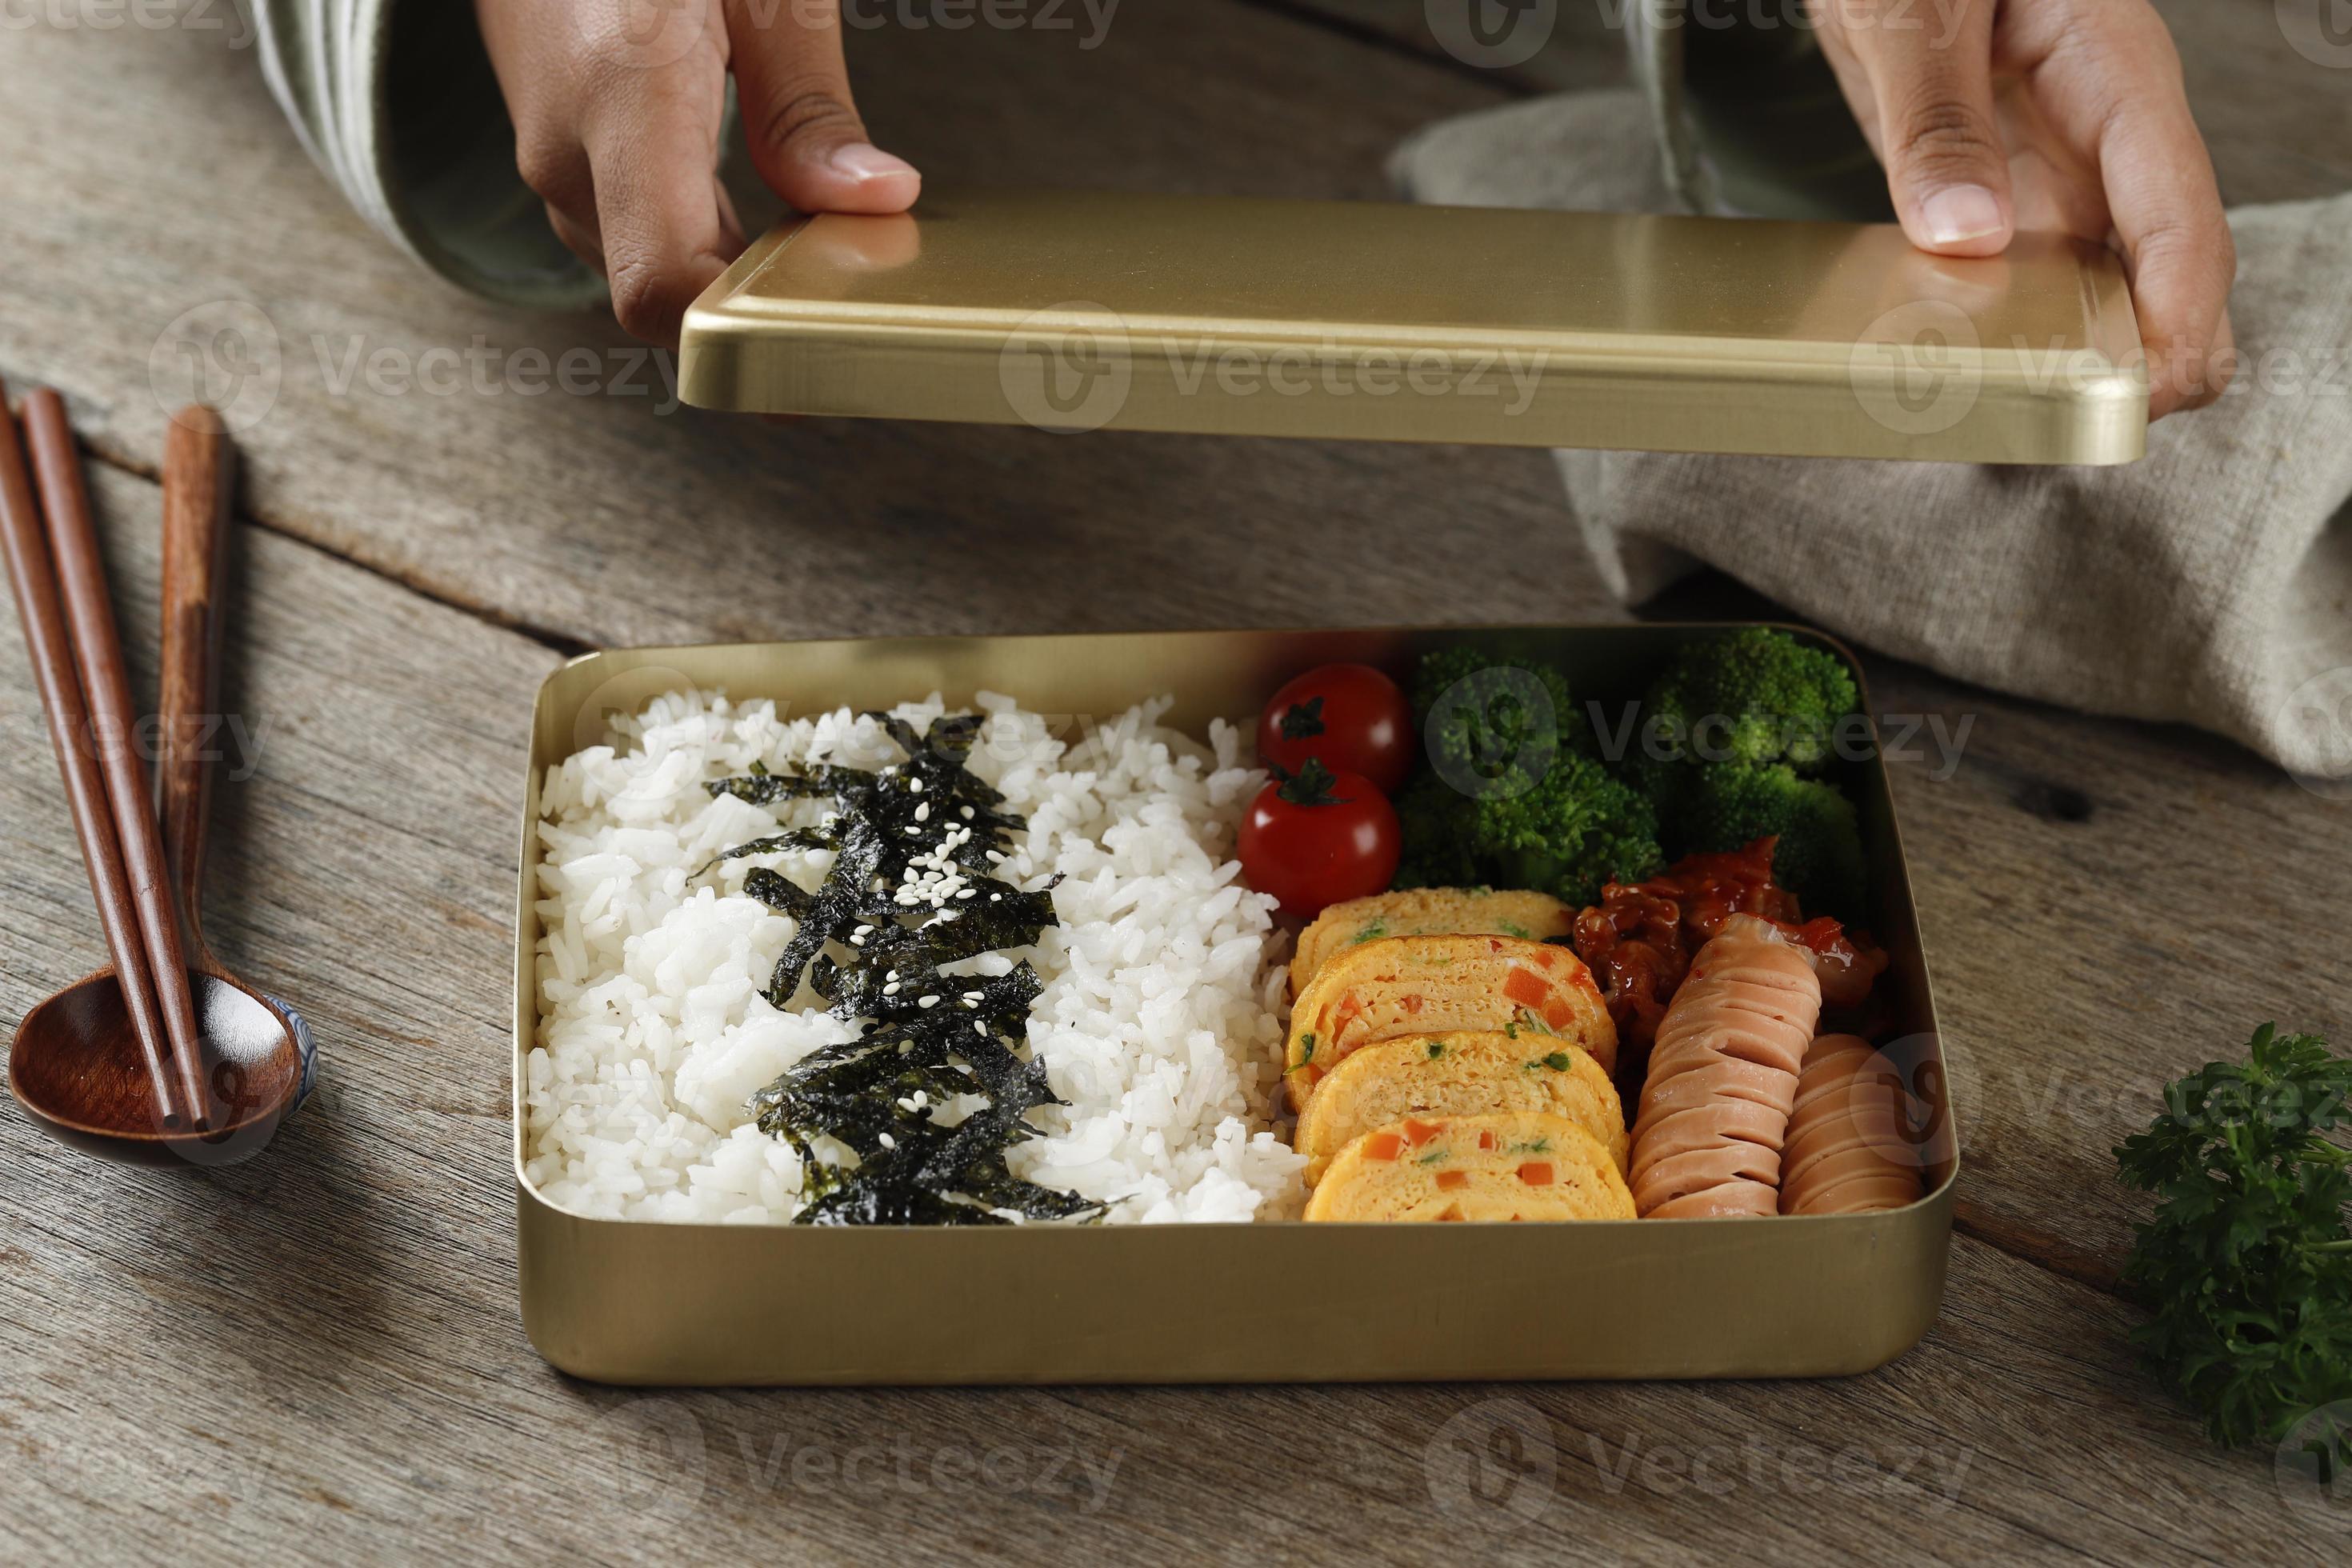 https://static.vecteezy.com/system/resources/previews/011/273/335/large_2x/female-hand-preparing-dosirak-or-korean-bento-box-served-on-gold-metal-lunchbox-to-keep-food-warm-photo.jpg